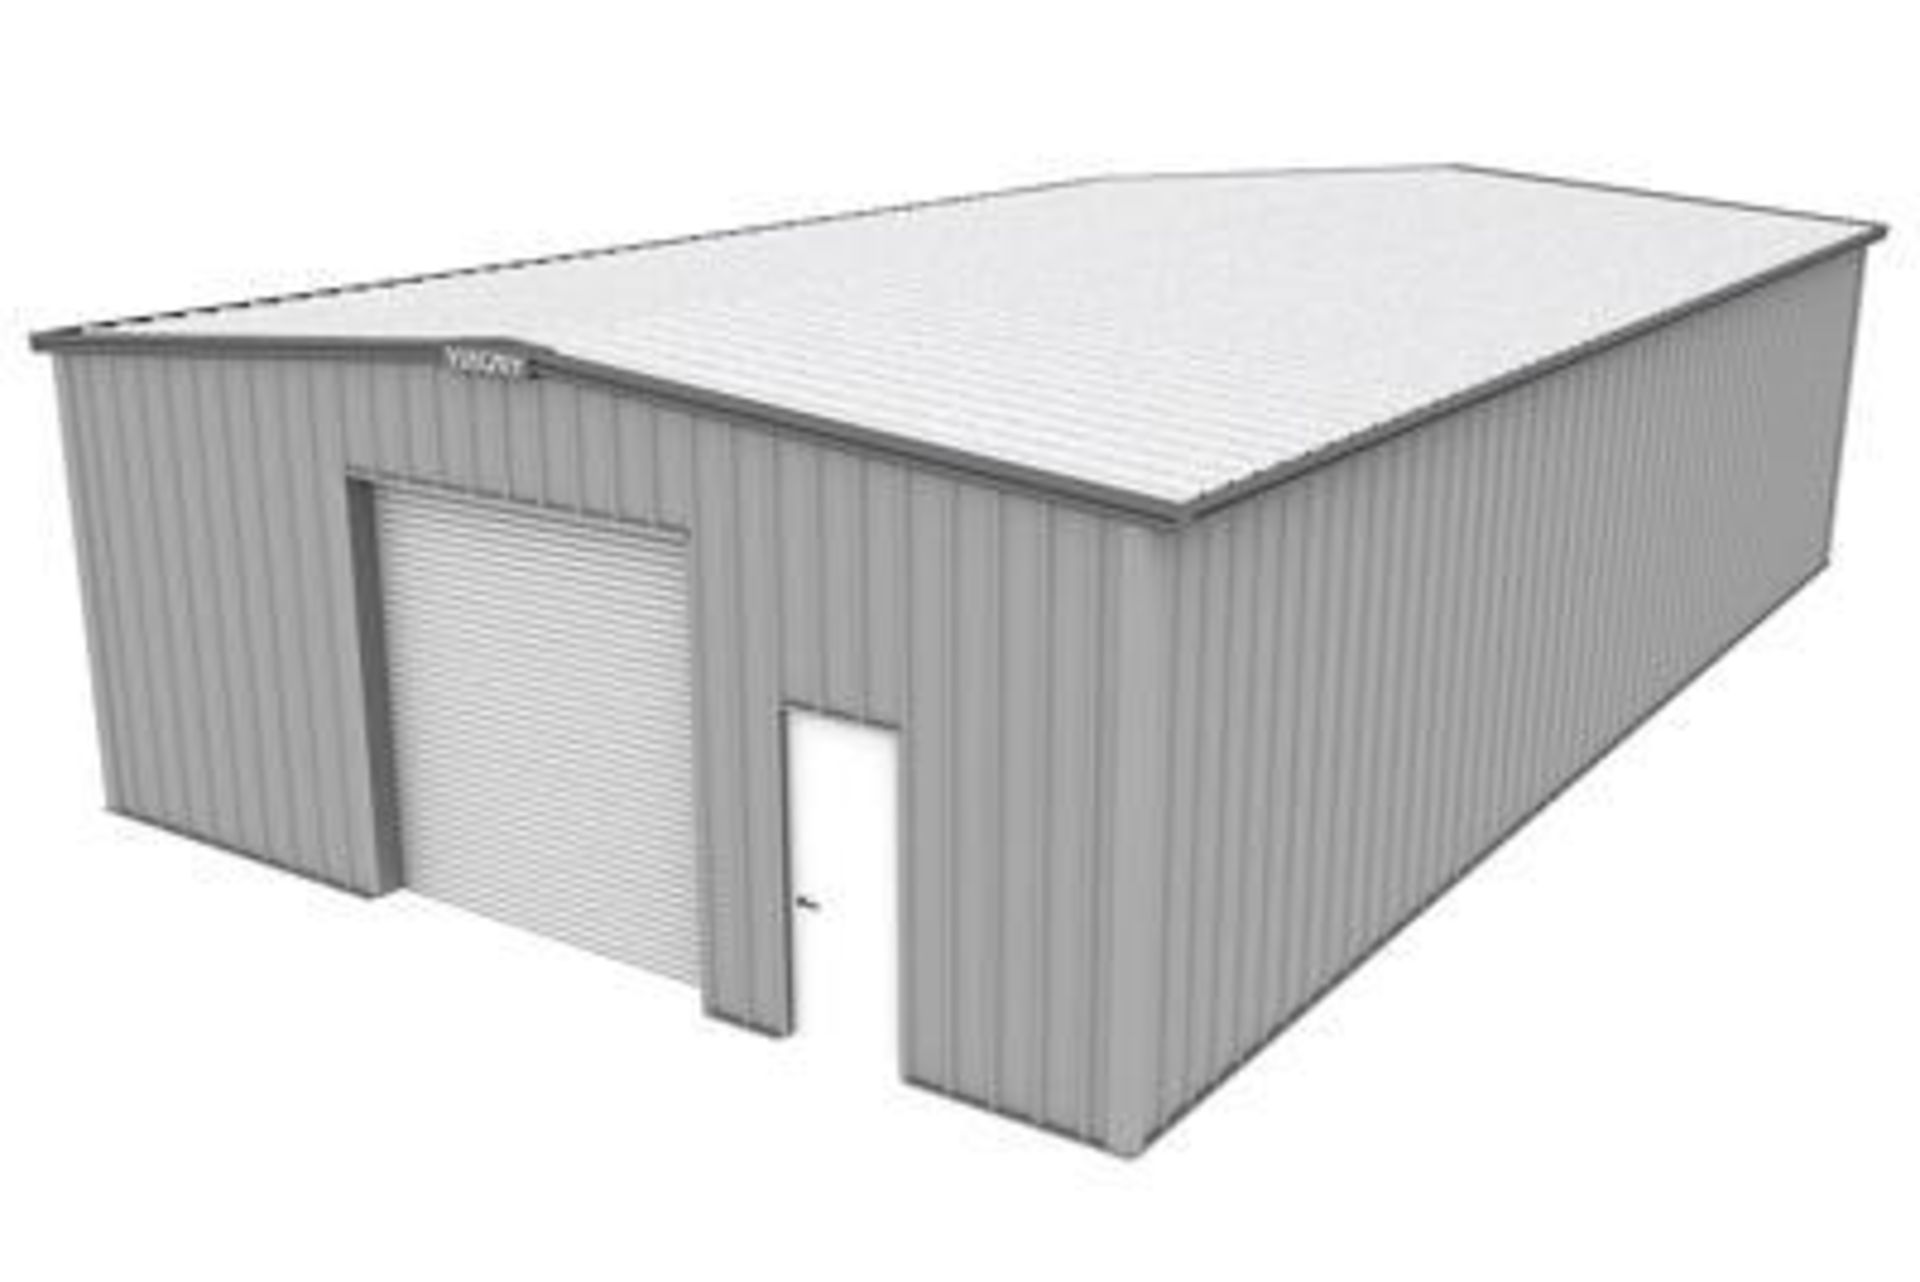 Pre-Fabricated 100,000 SF Manufacturing Building/Warehouse - Image 2 of 16